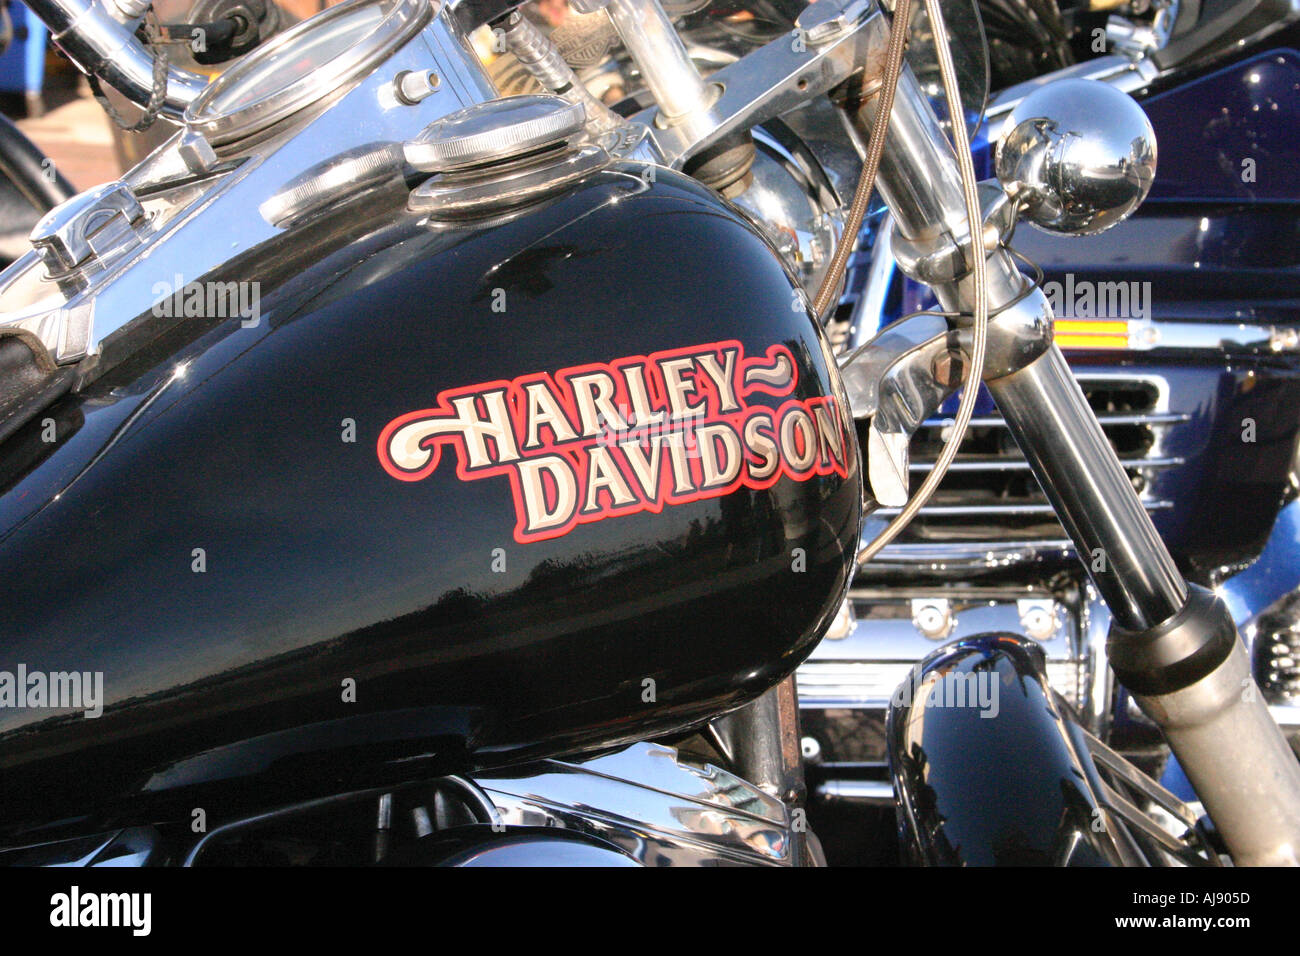 Harley Davidson Poster High Resolution Stock Photography And Images Alamy